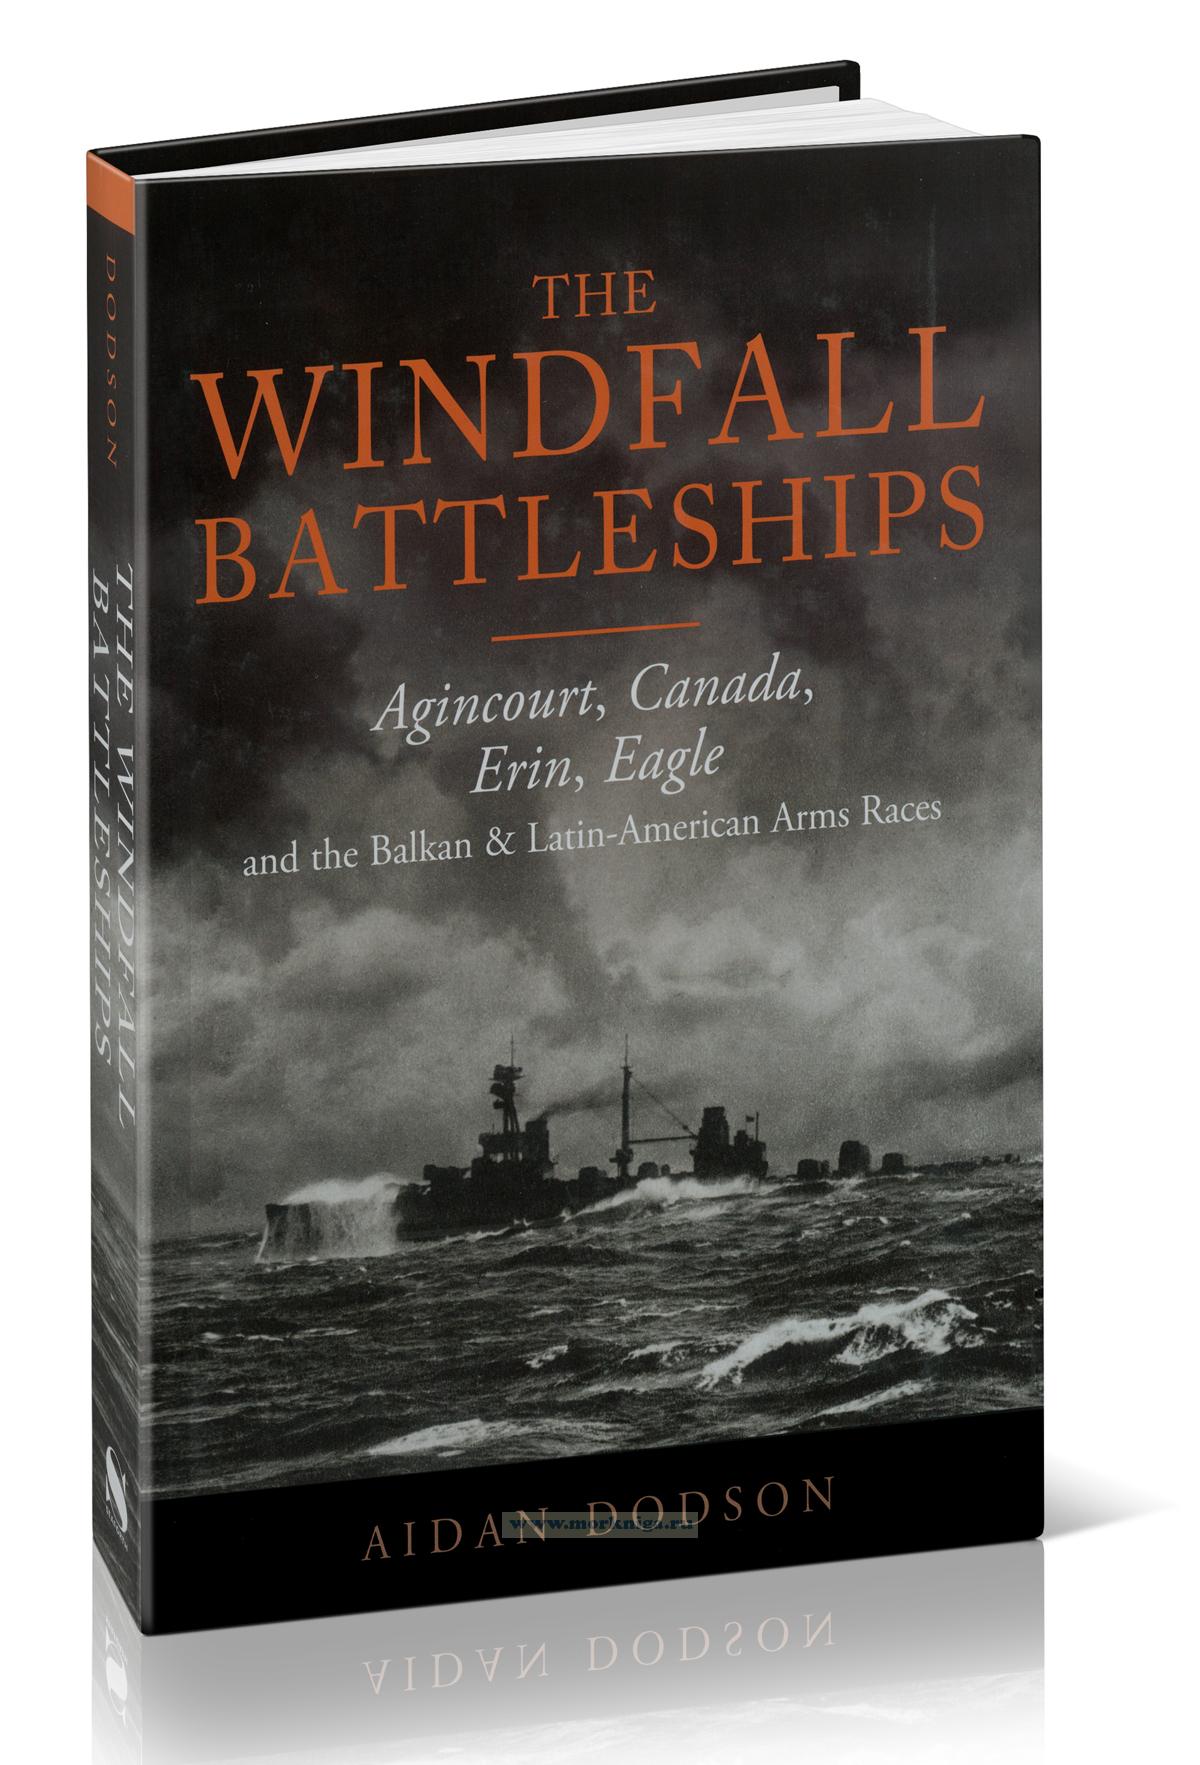 The Windfall Battleships. Agincourt, Canada, Erin, Eagle and the Balkan & Latin-American Arms Races